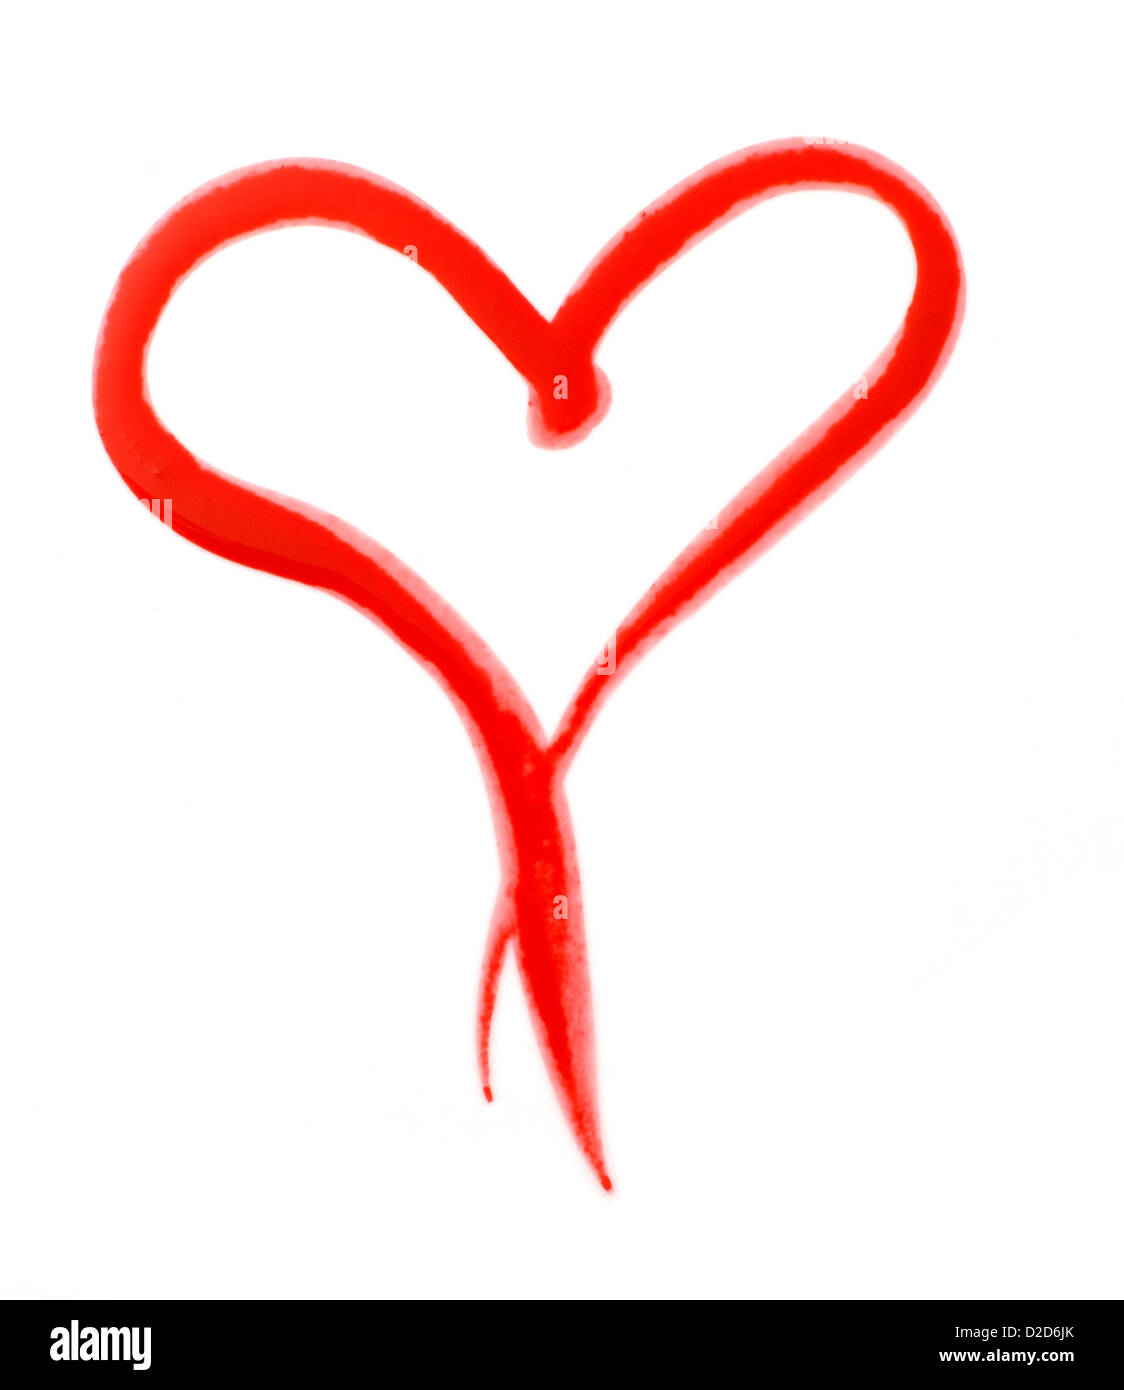 Red outline of heart cut out white background Stock Photo